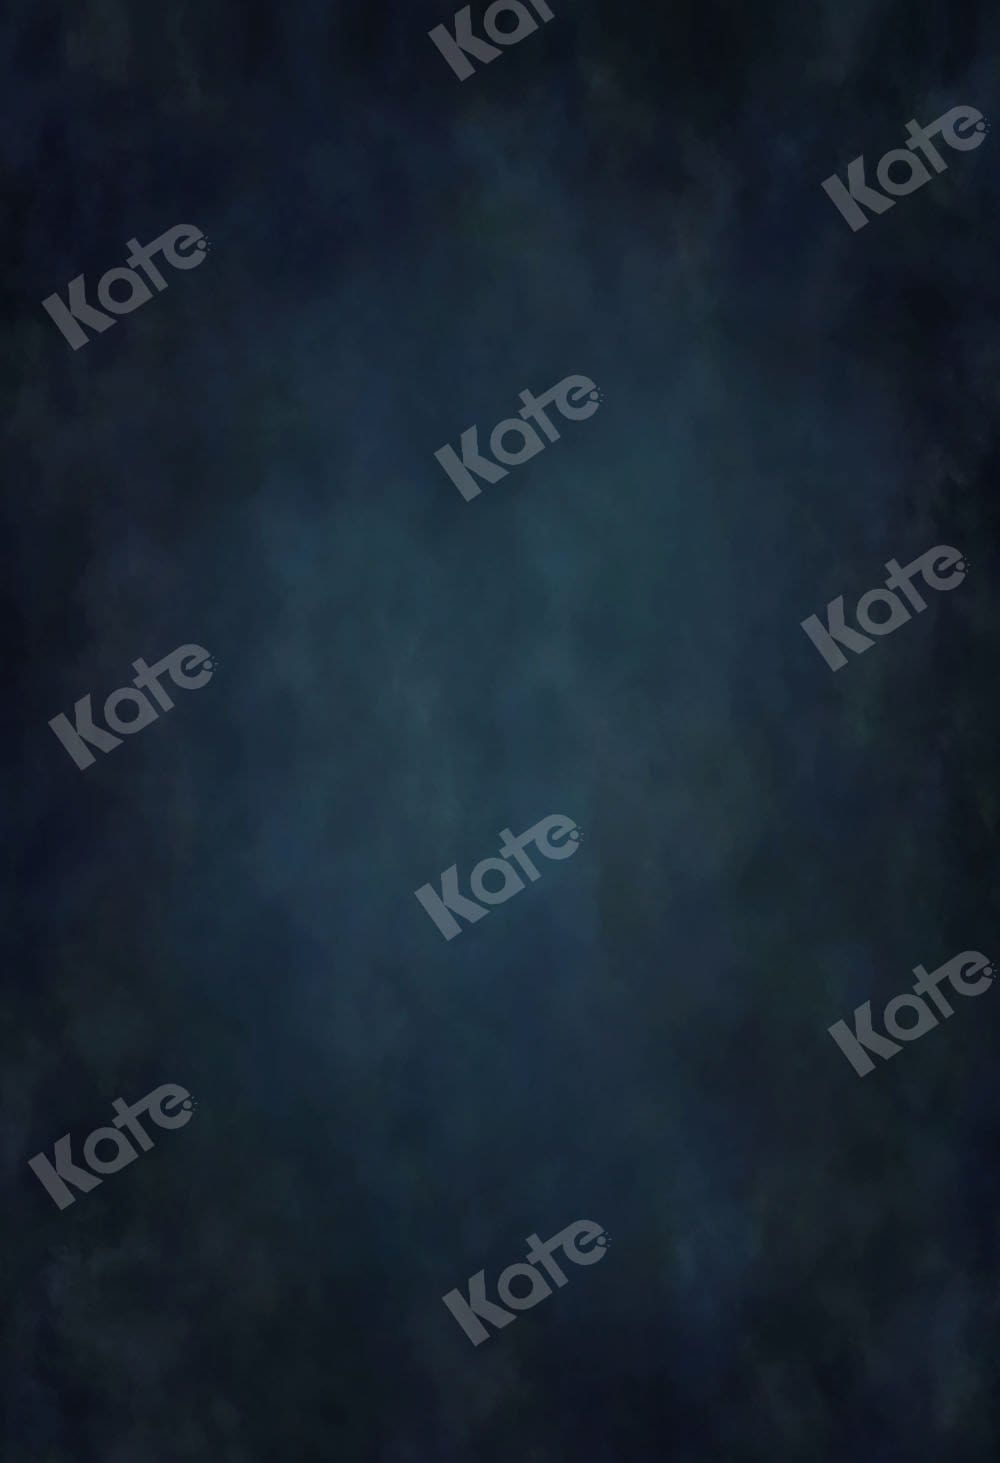 Kate Dark Blue Abstract Backdrop Designed by Kate Image